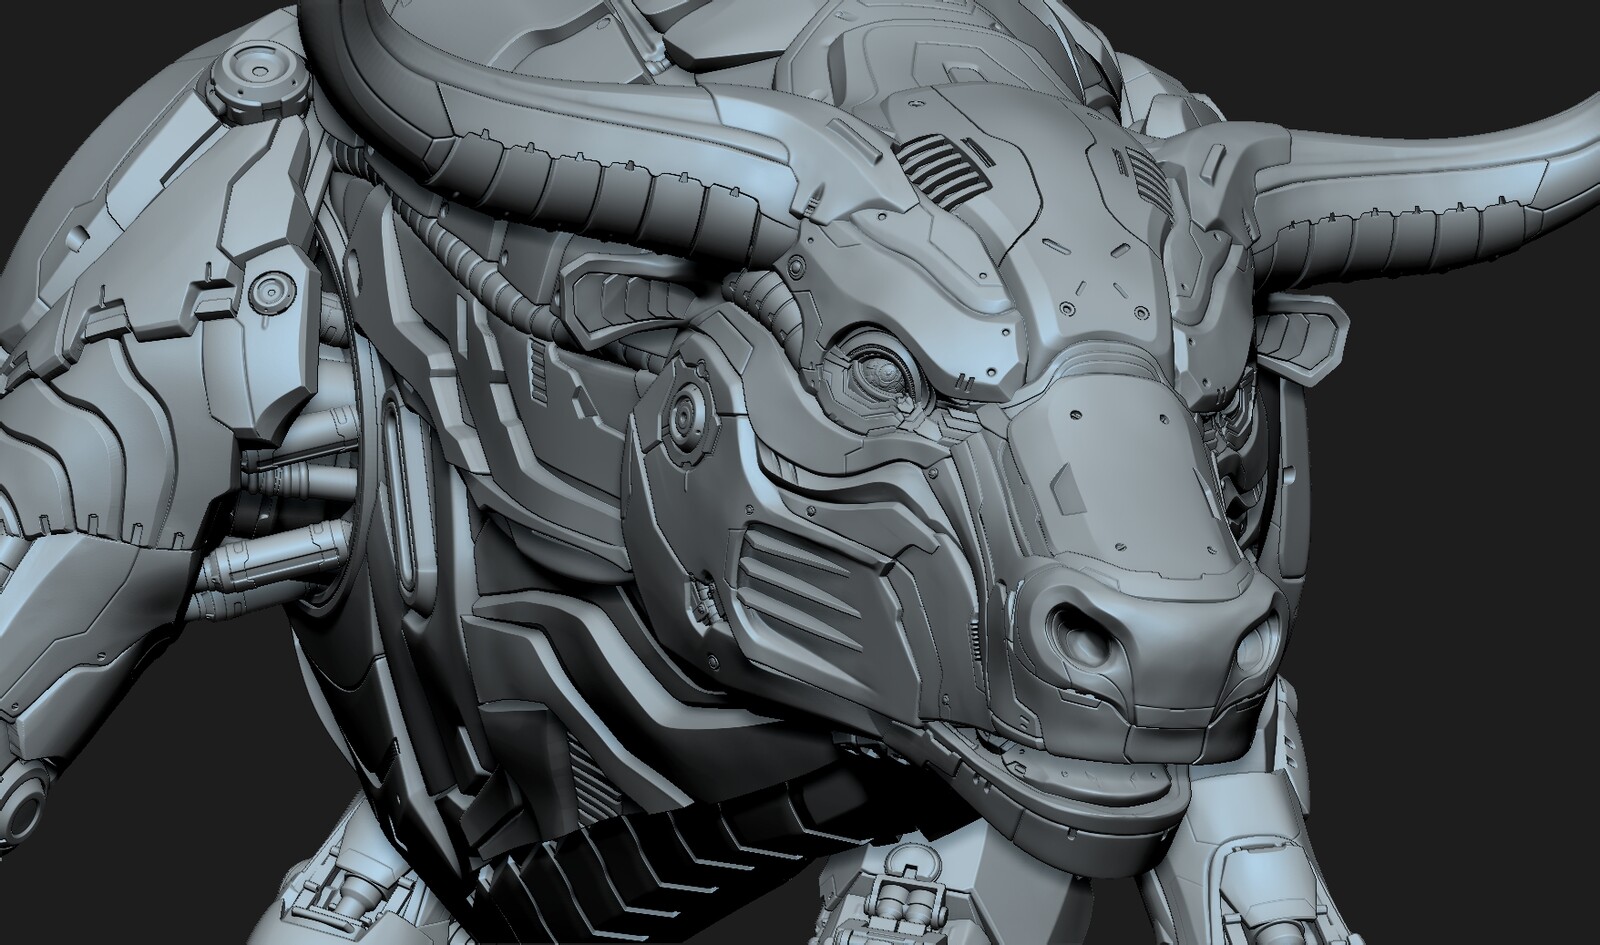 Some Zbrush screengrabs to highlight areas I worked on; I was responsable for alot of the detailing on around the eyes, nose and jaw, as well as the horns. 